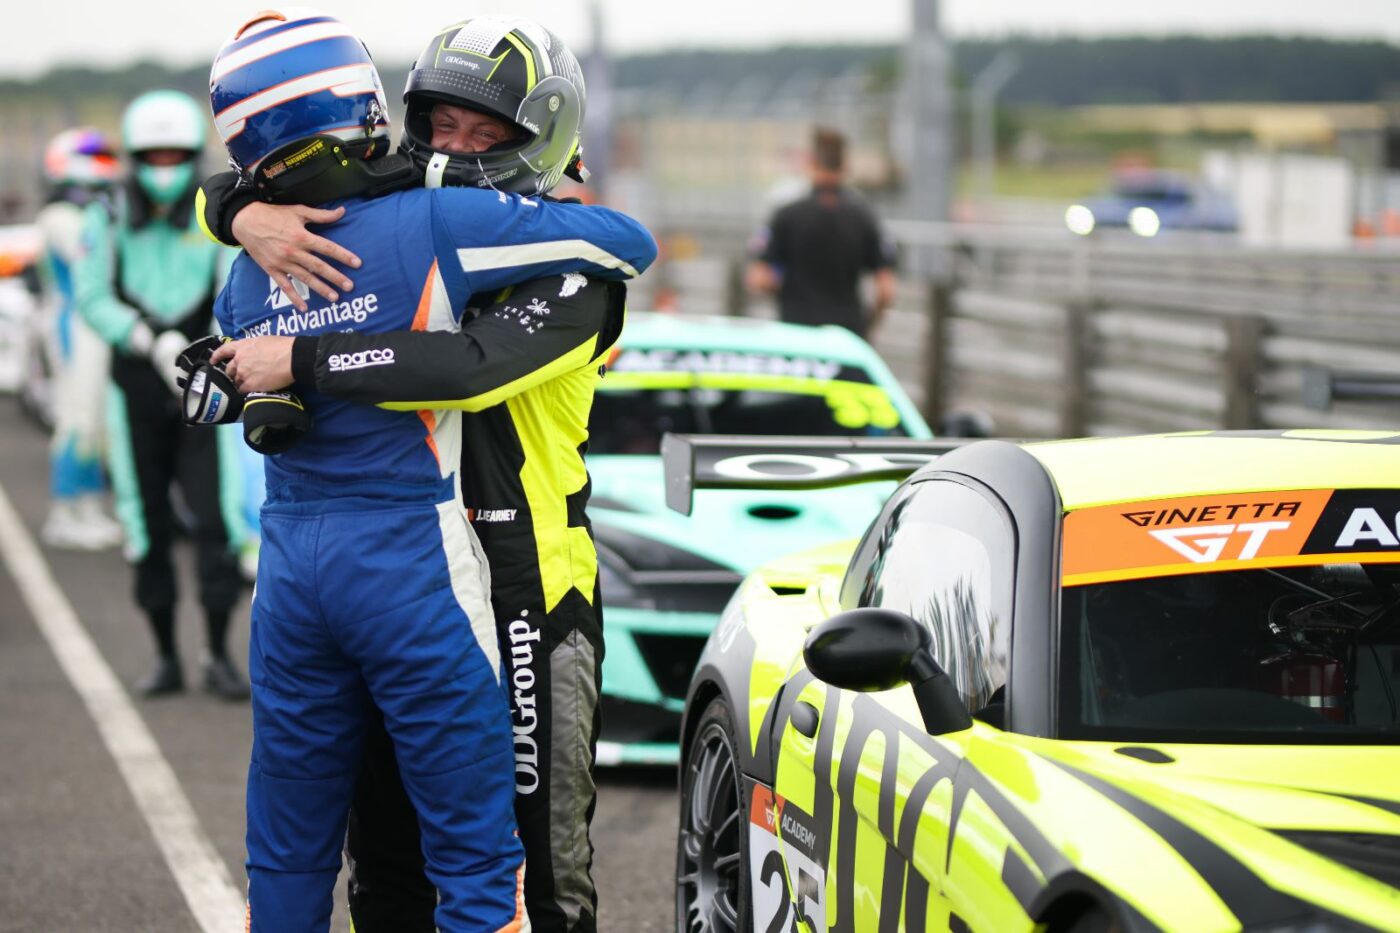 White And Kearney Share Ginetta GT Academy Wins